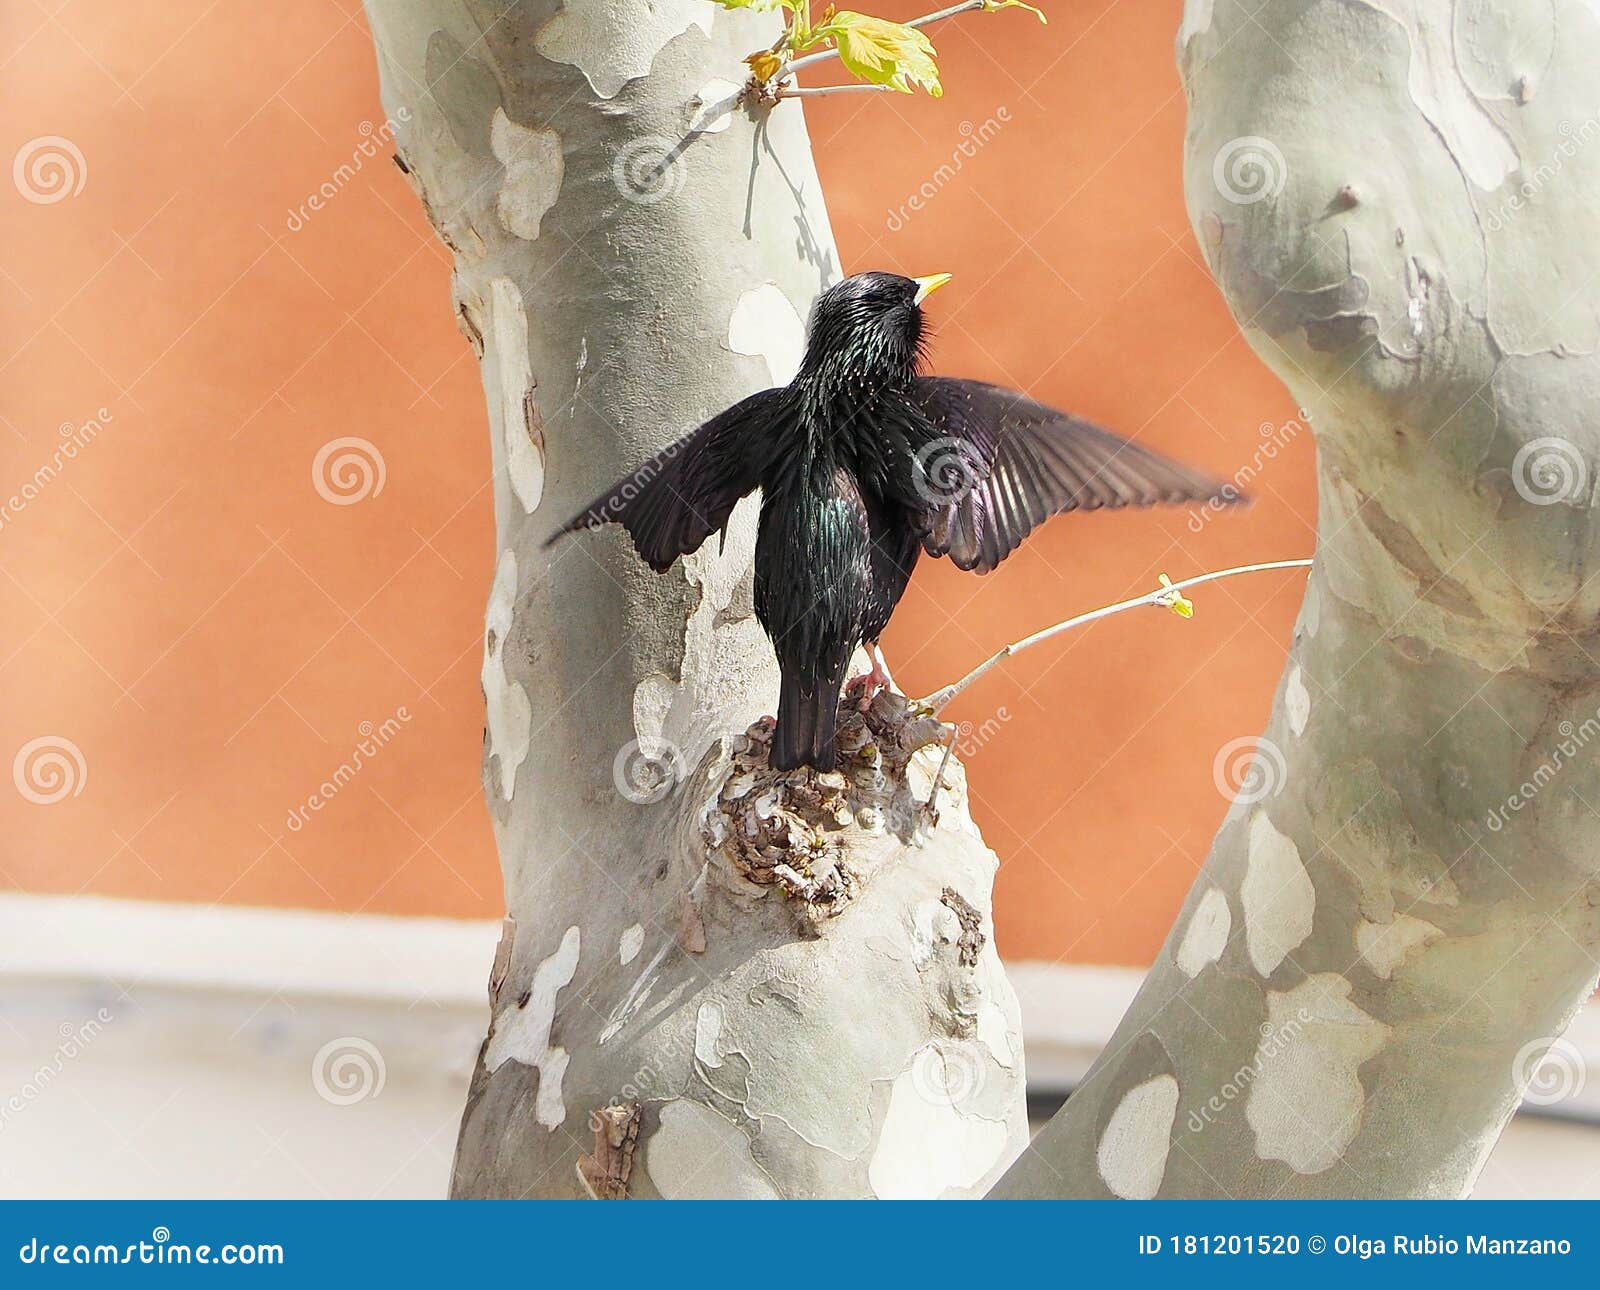 starling baby in barcelona city singing in the tree